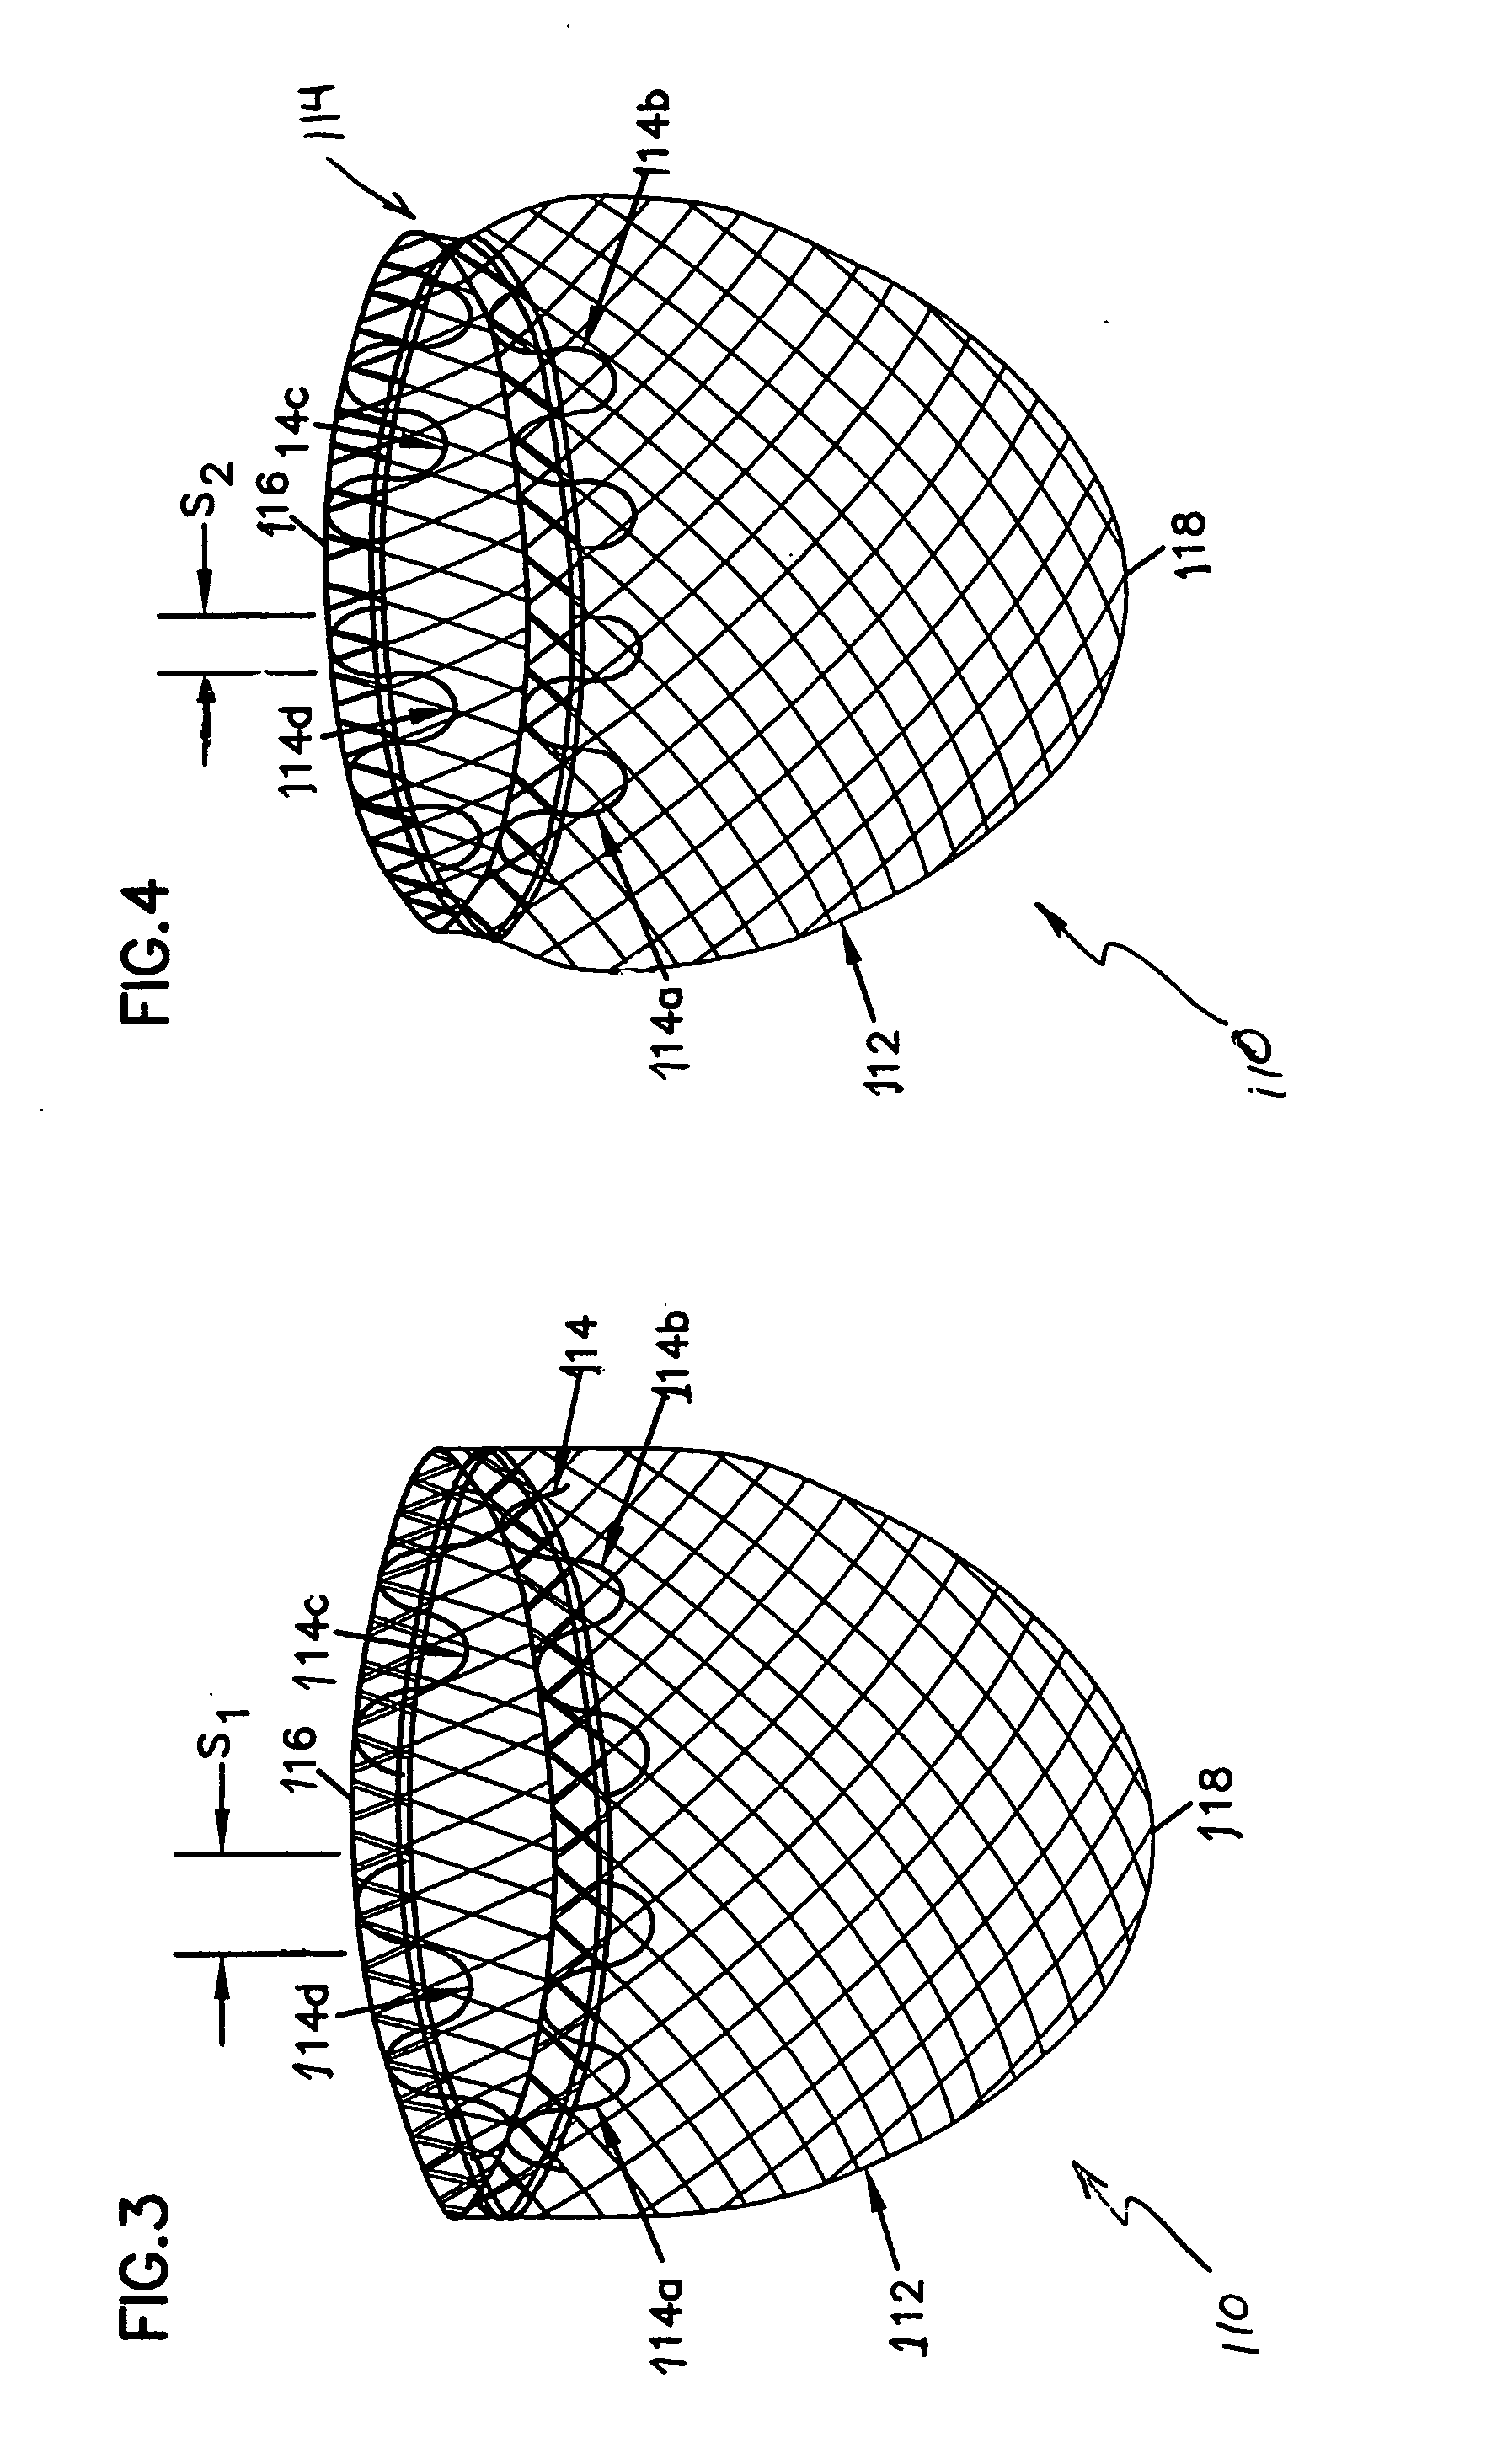 Self-adjusting securing structure for a cardiac support device